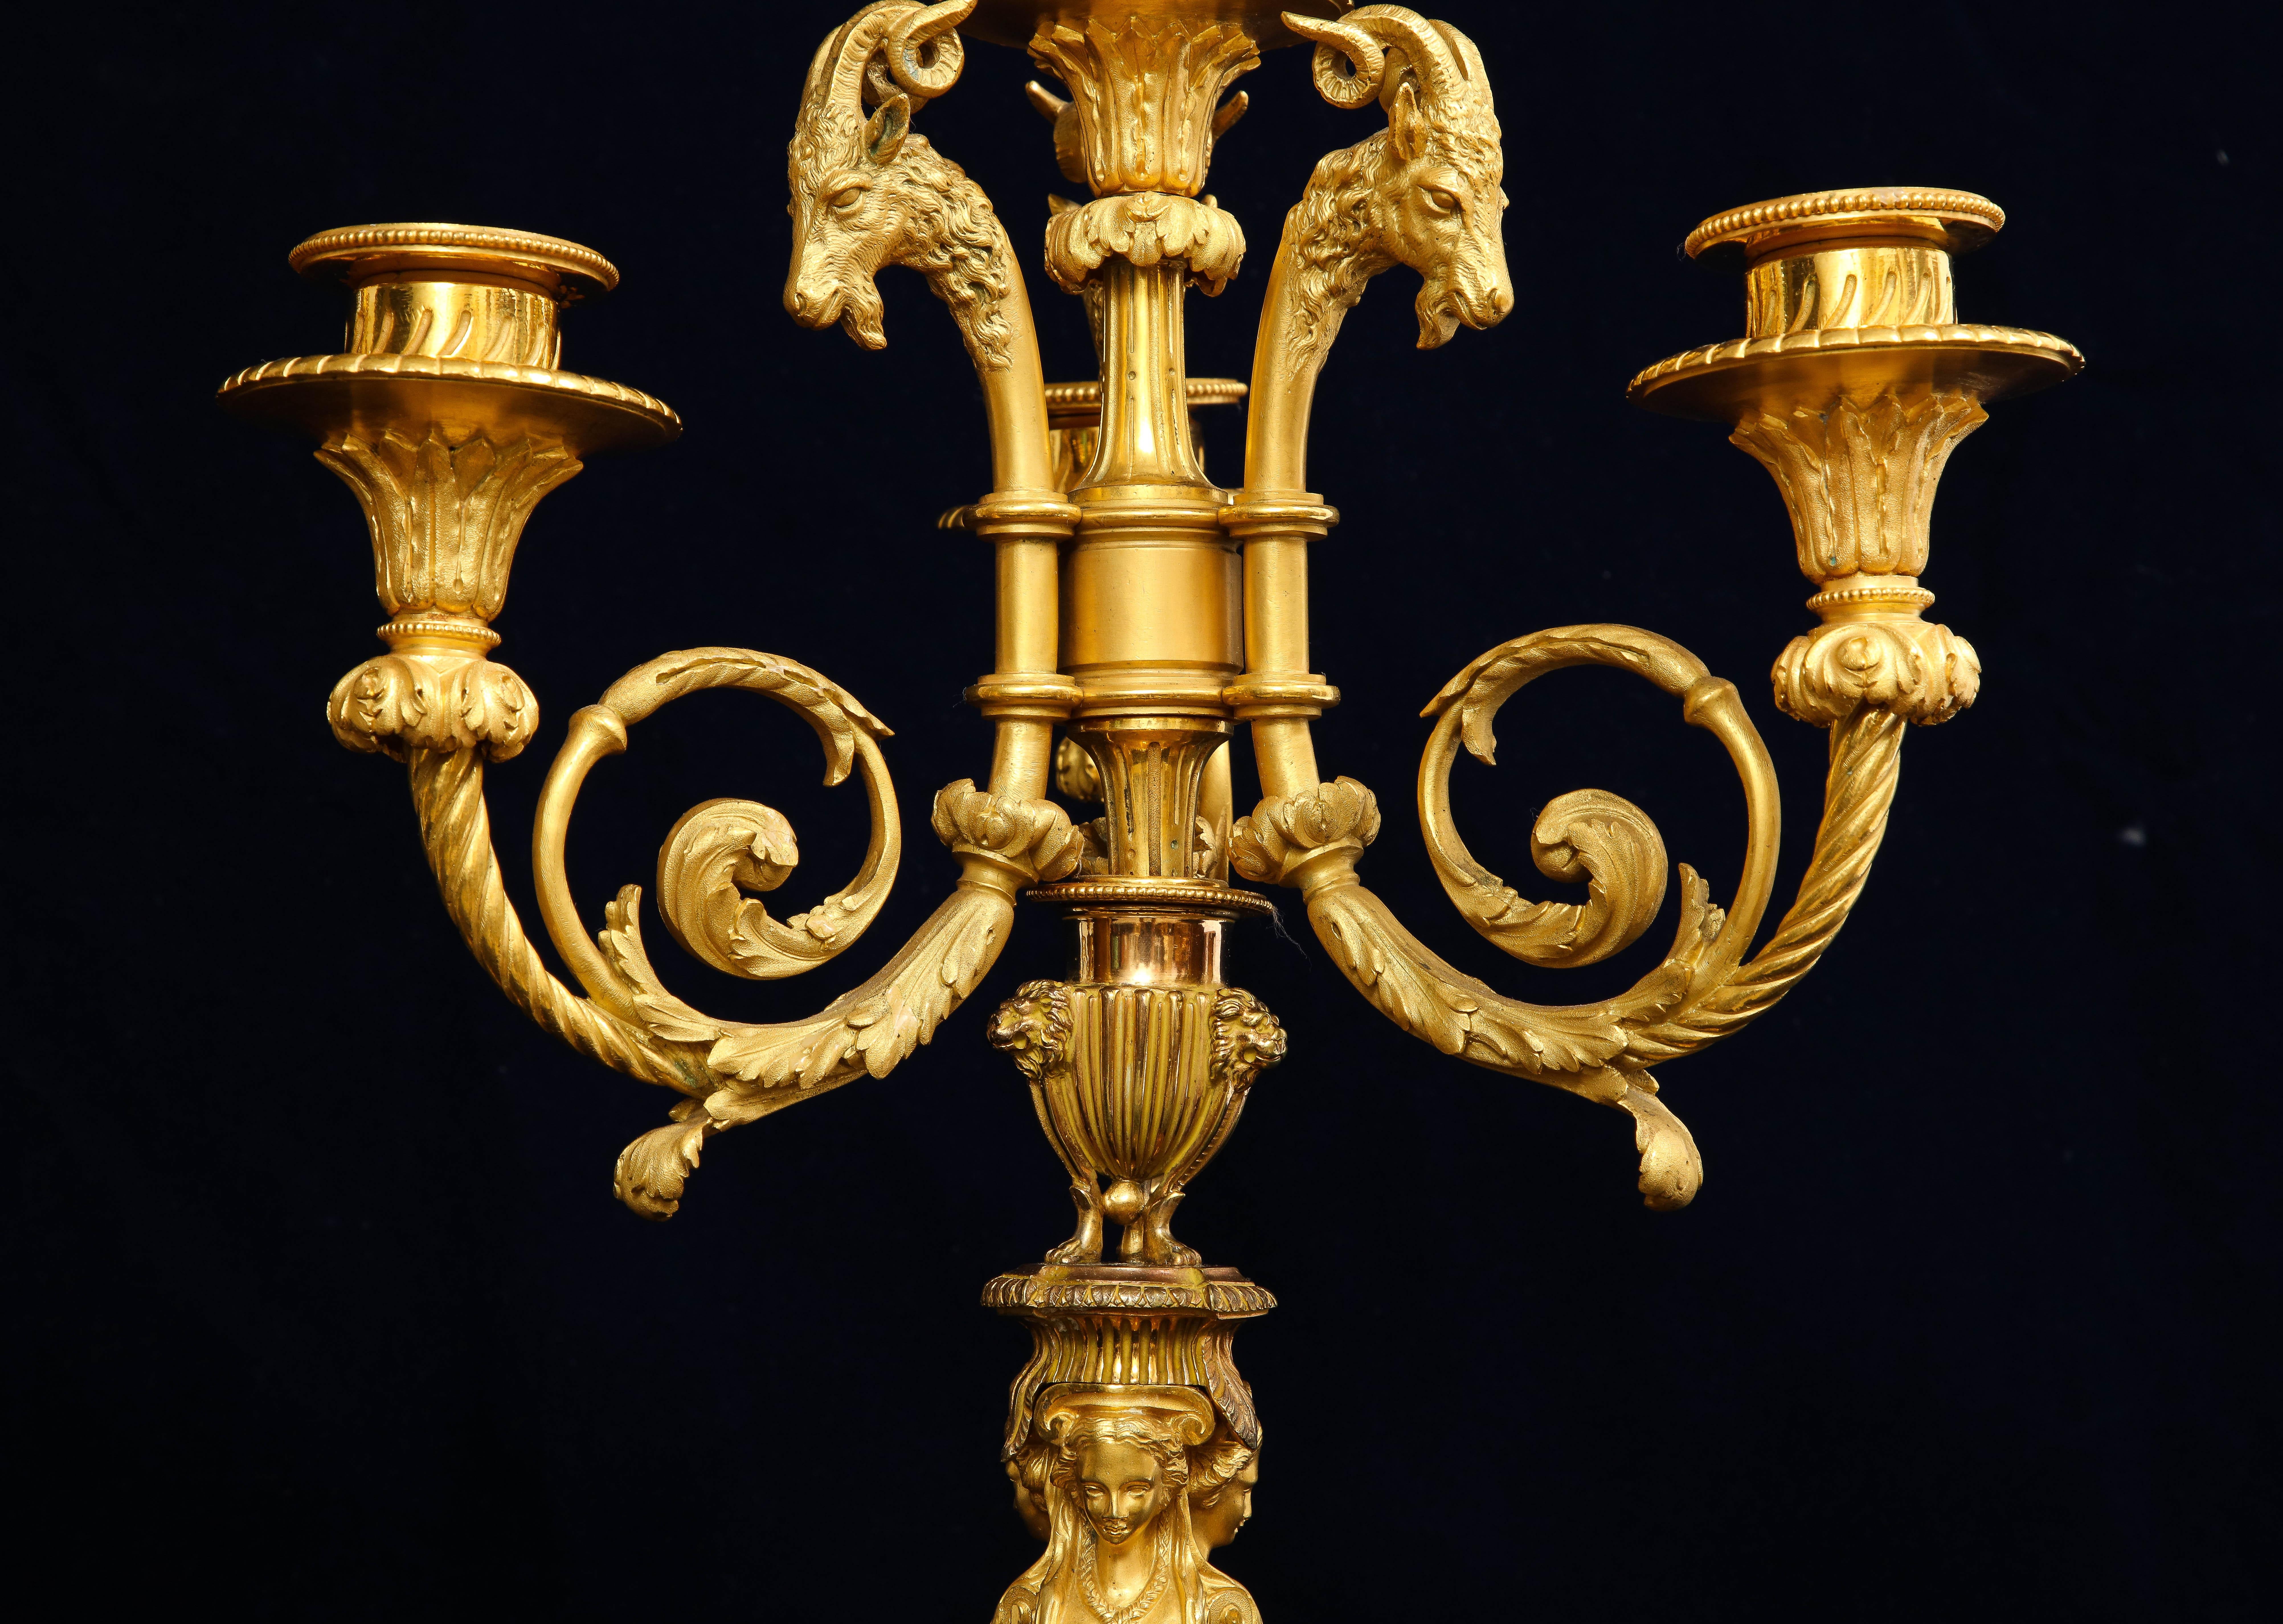 Pair of French 19th C. Ormolu Figural 4 Light Candelabras, After P. Gouthiere For Sale 2